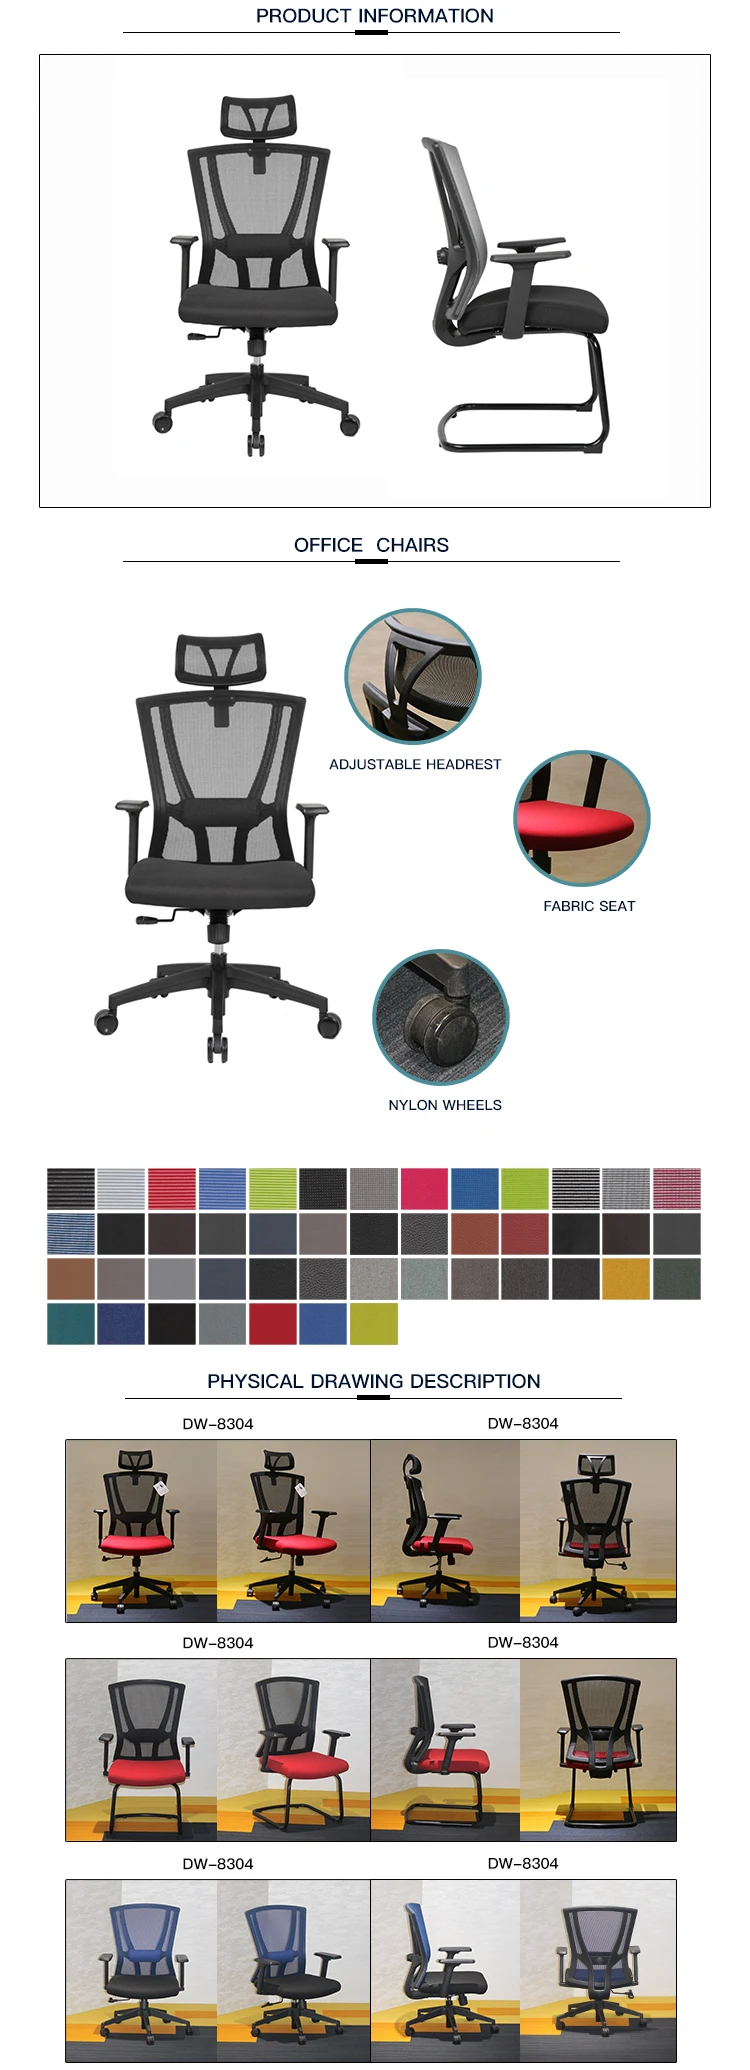 China manufacturer PP structure latop plastic chairs swivel full mesh office staff chairs office task chair